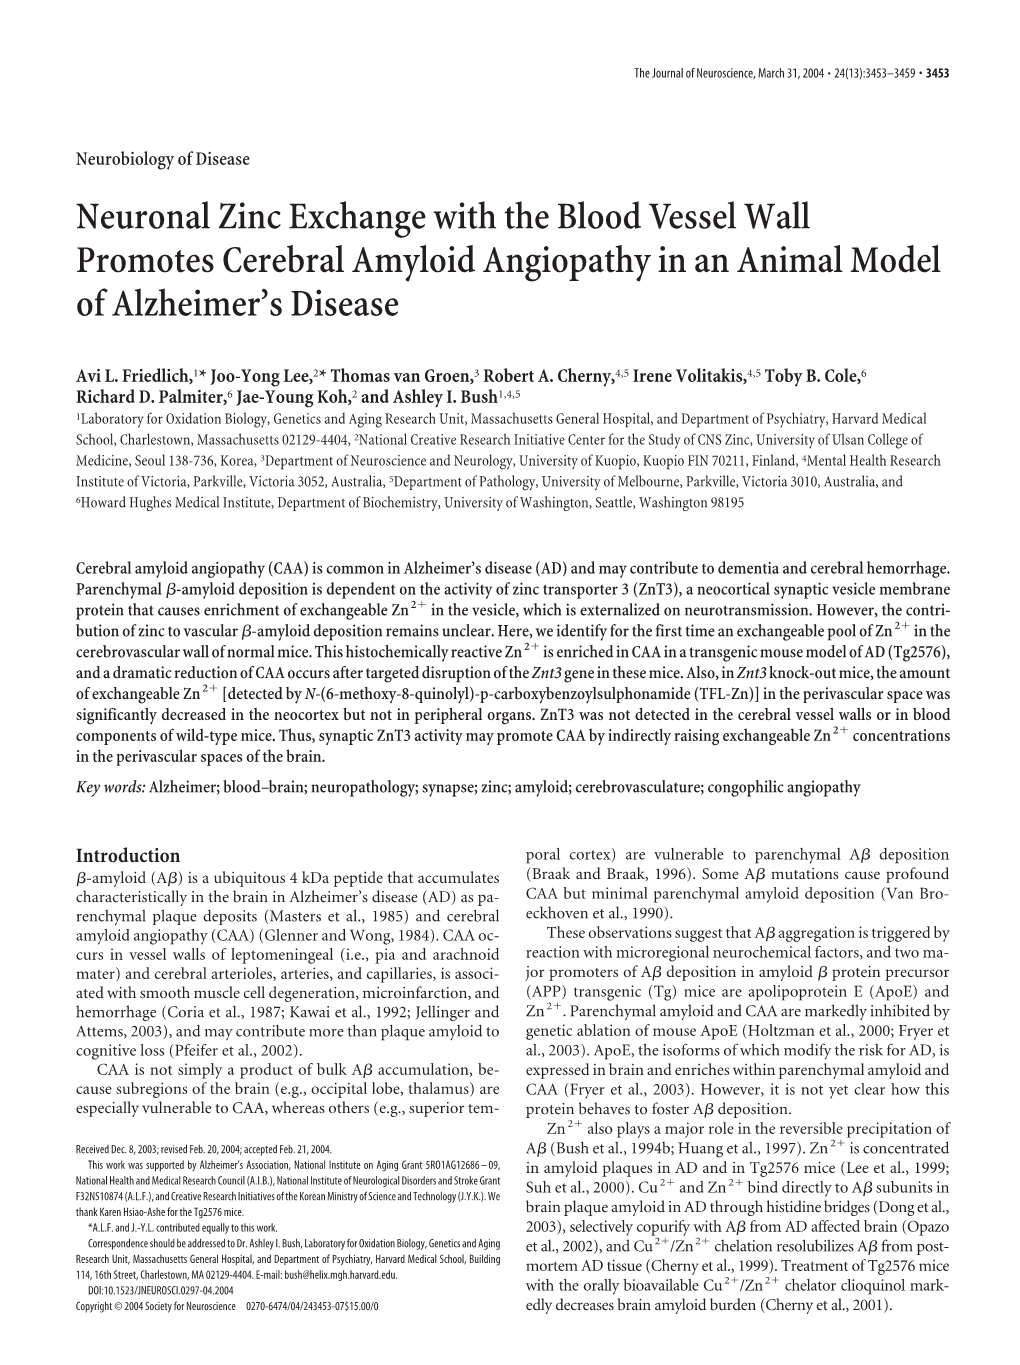 Neuronal Zinc Exchange with the Blood Vessel Wall Promotes Cerebral Amyloid Angiopathy in an Animal Model of Alzheimer's Disea